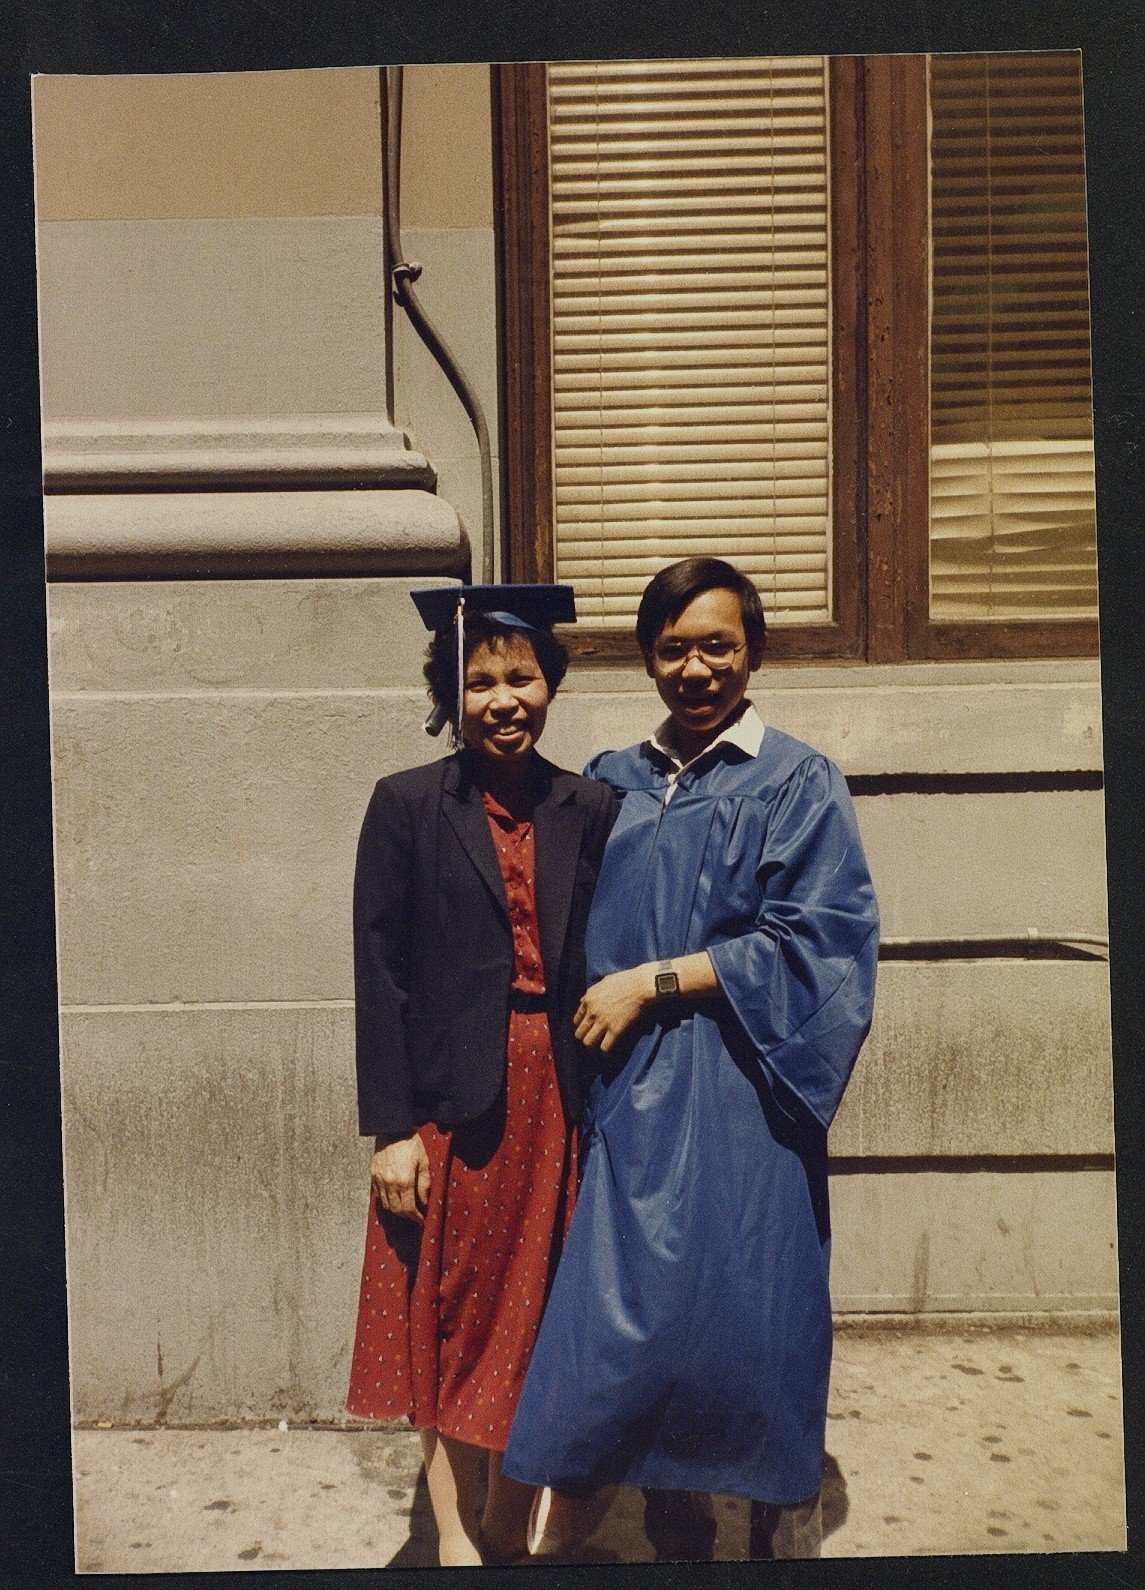 Kevin, in a blue graduation gown, stands with his mother who is wearing his graduation cap and a red dress and navy blazer.